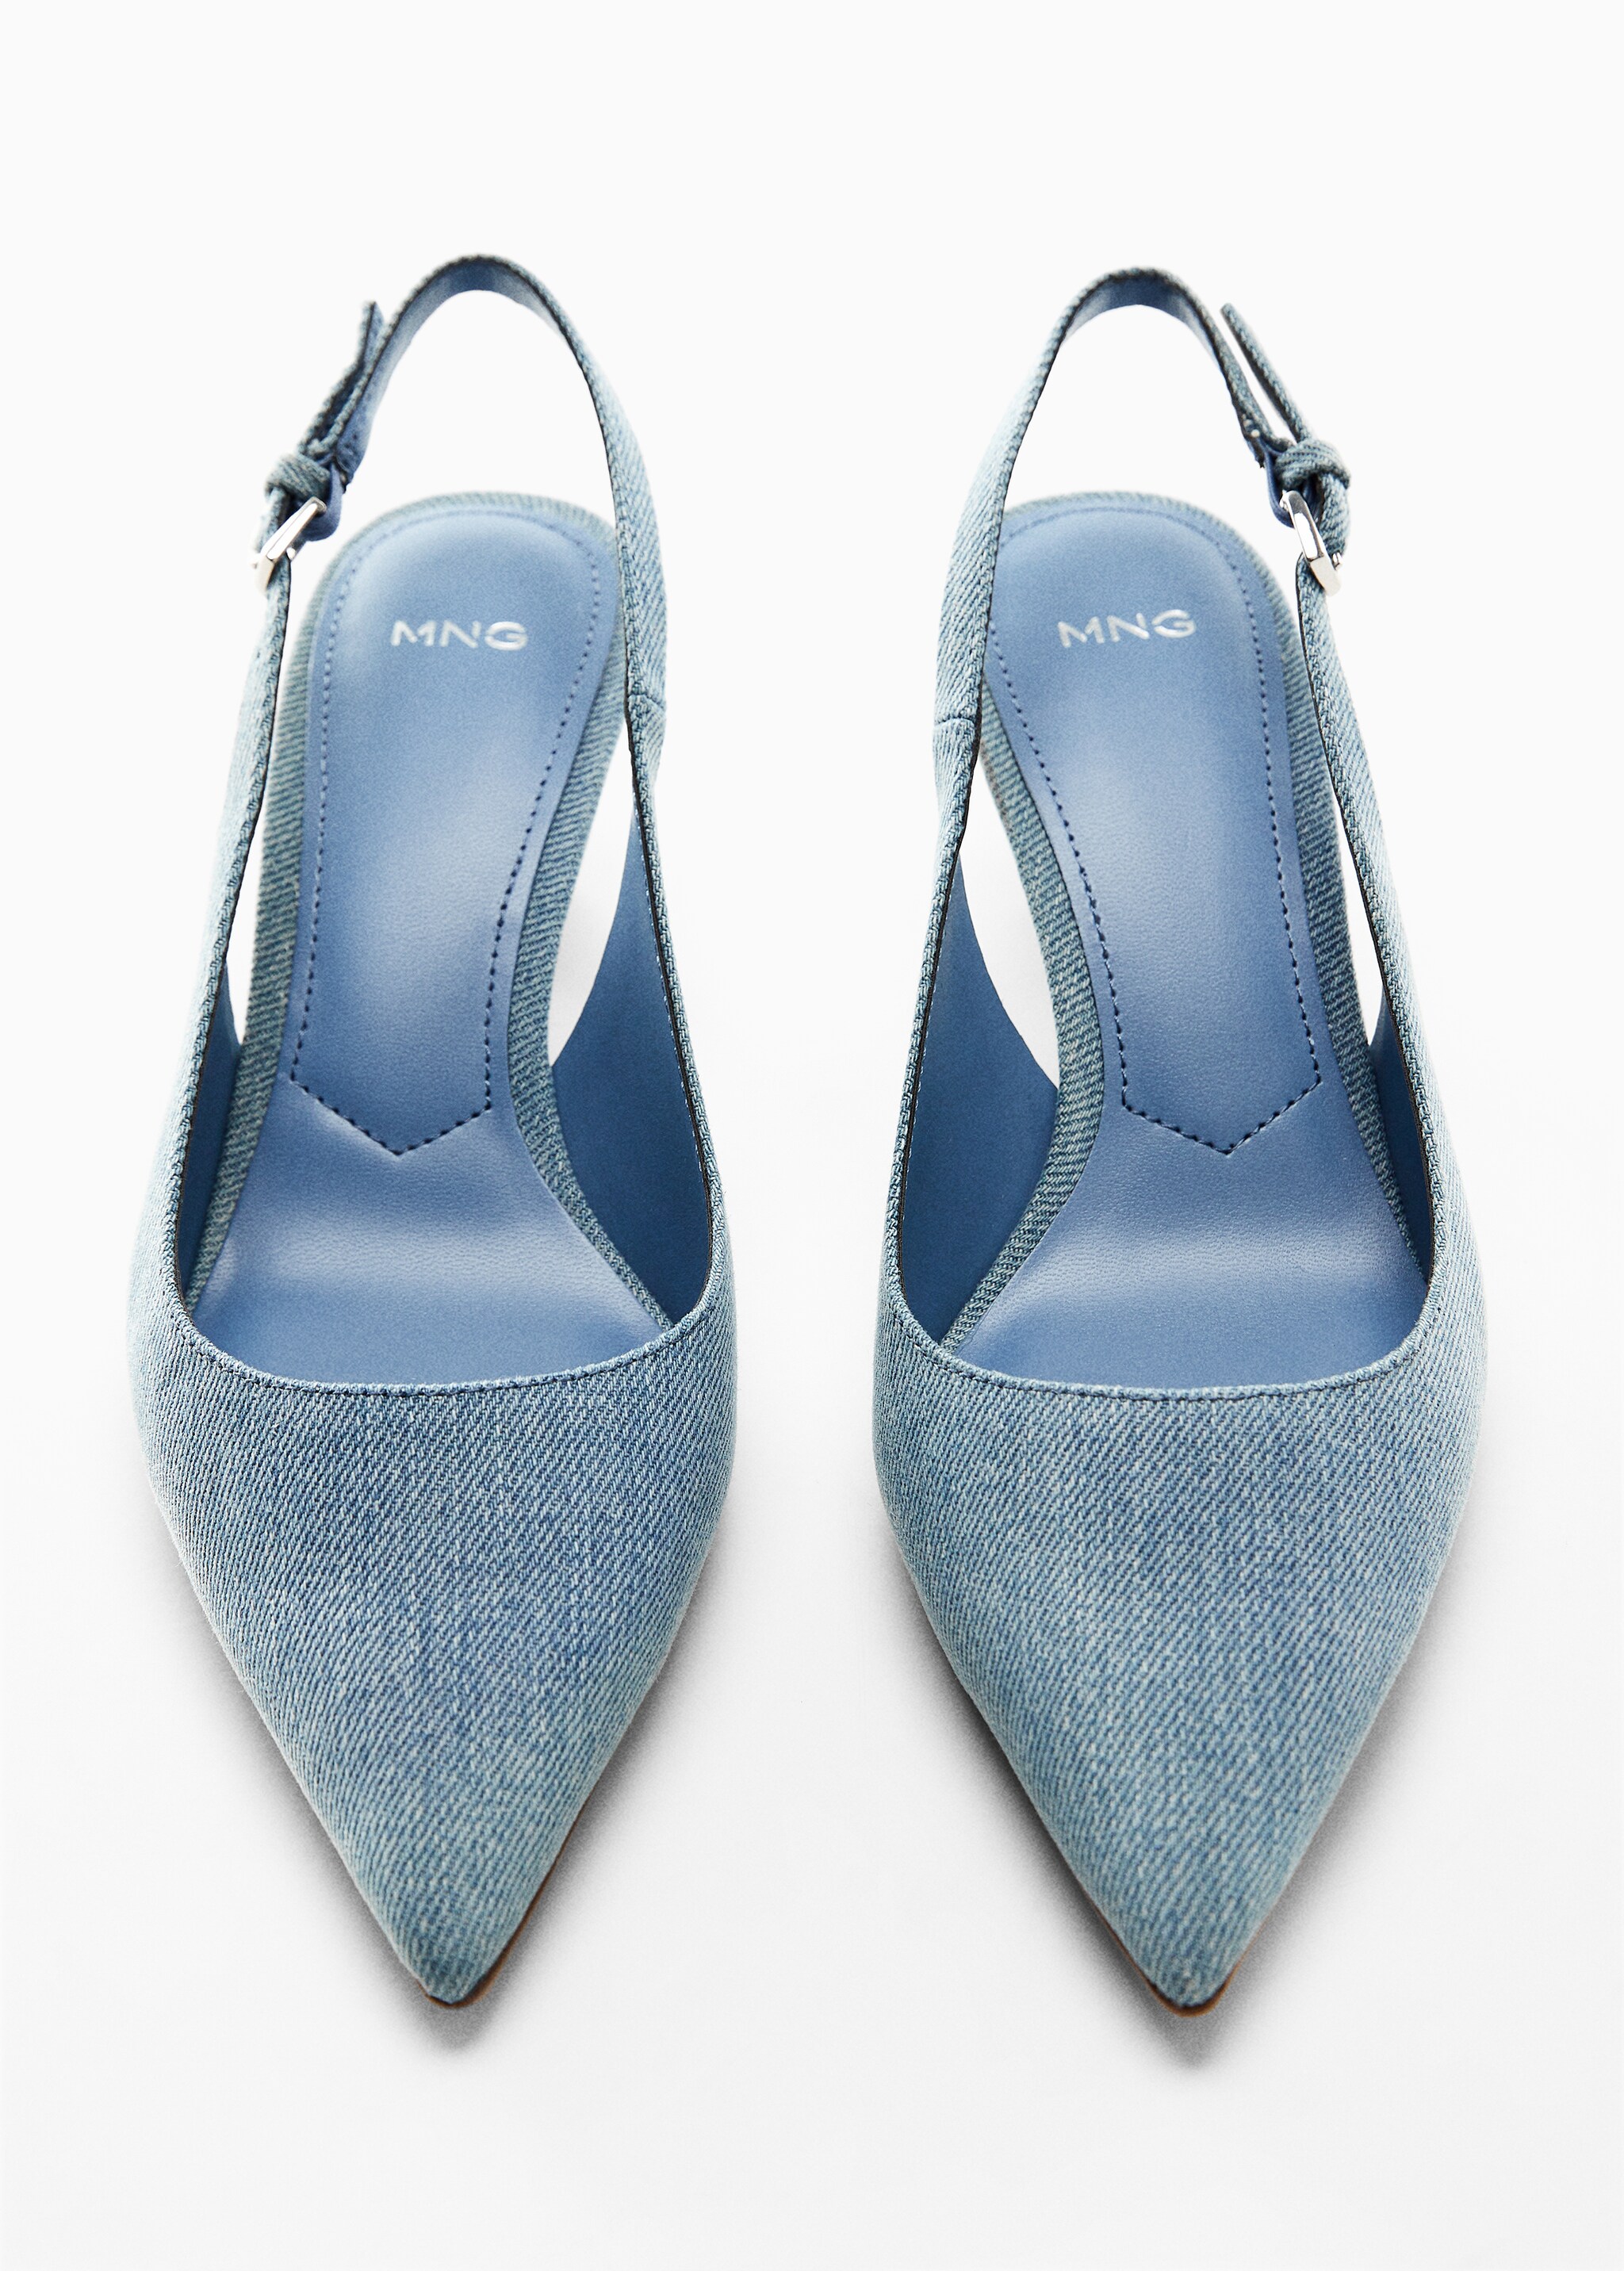 High-heeled denim shoes - Details of the article 5